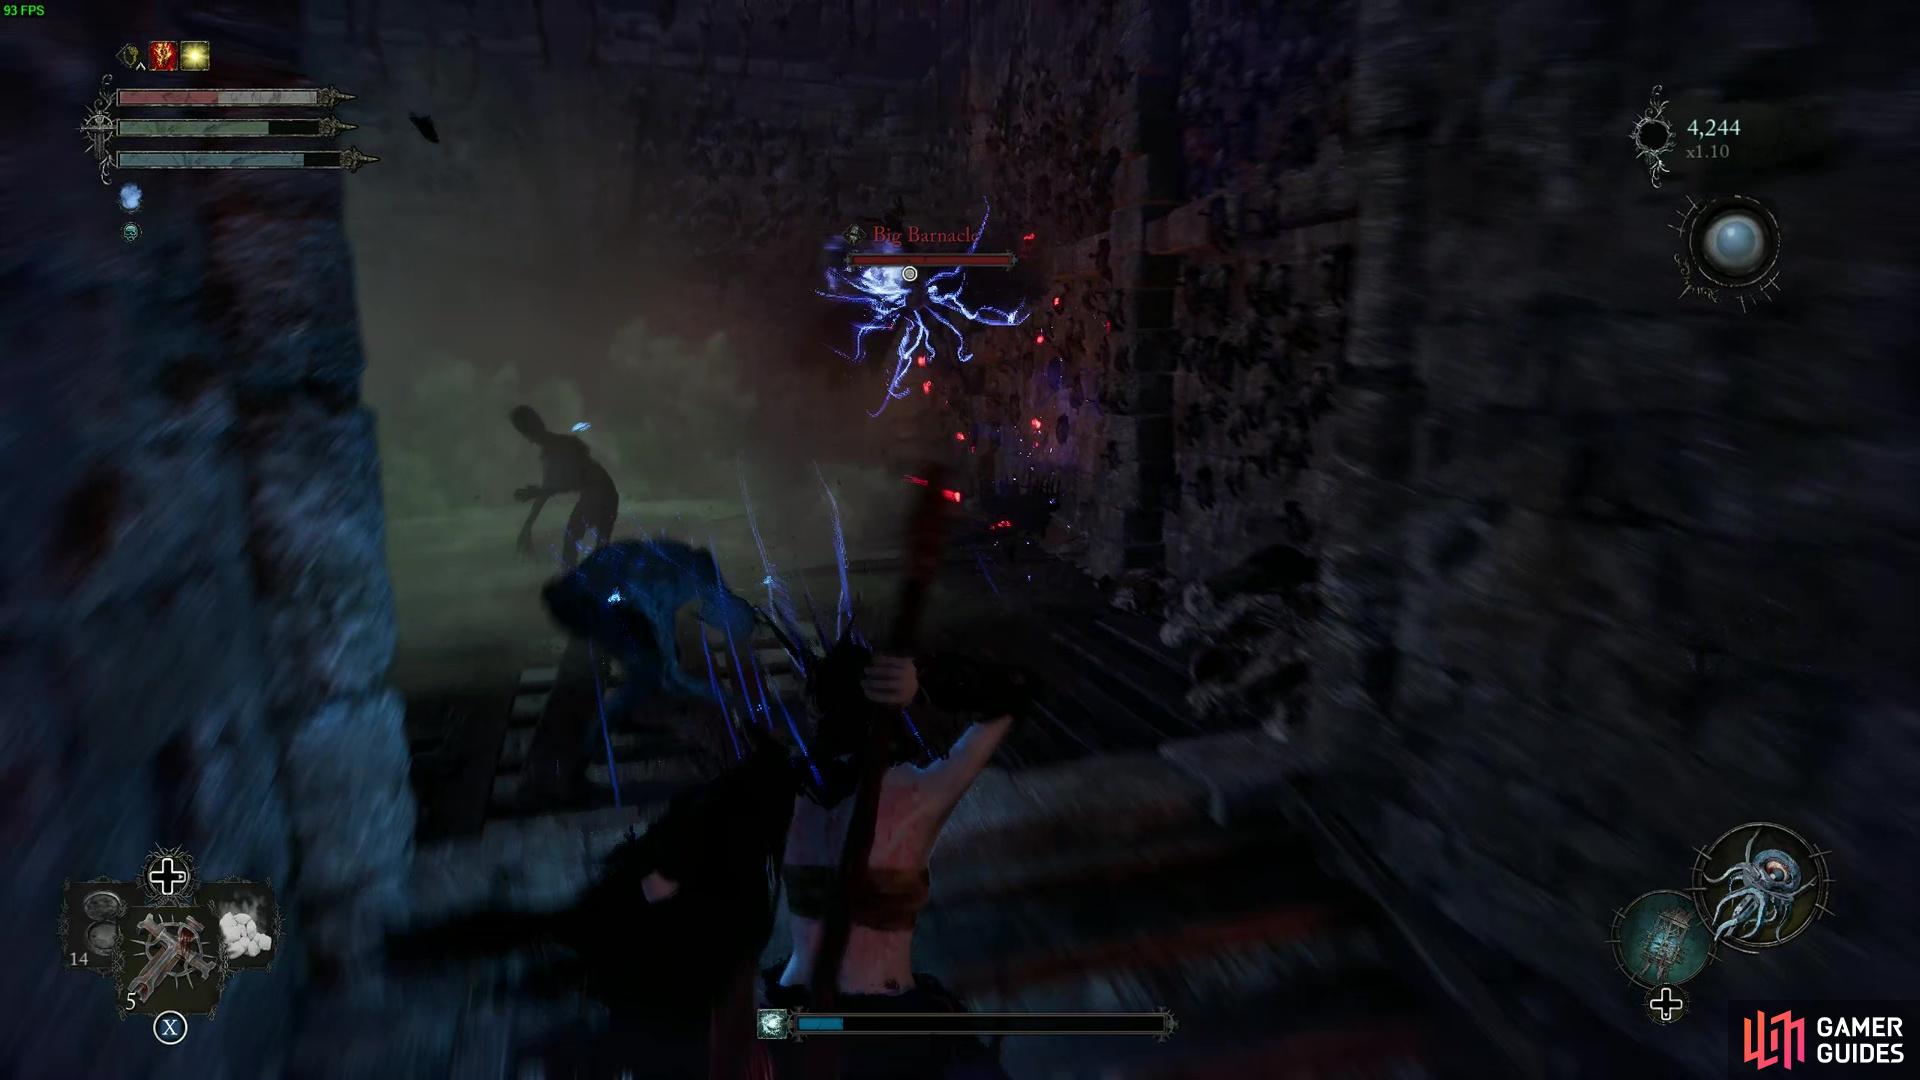 Players can find red lanterns that lead to mobs. It is one of the many multiplayer and coop activities in the game.